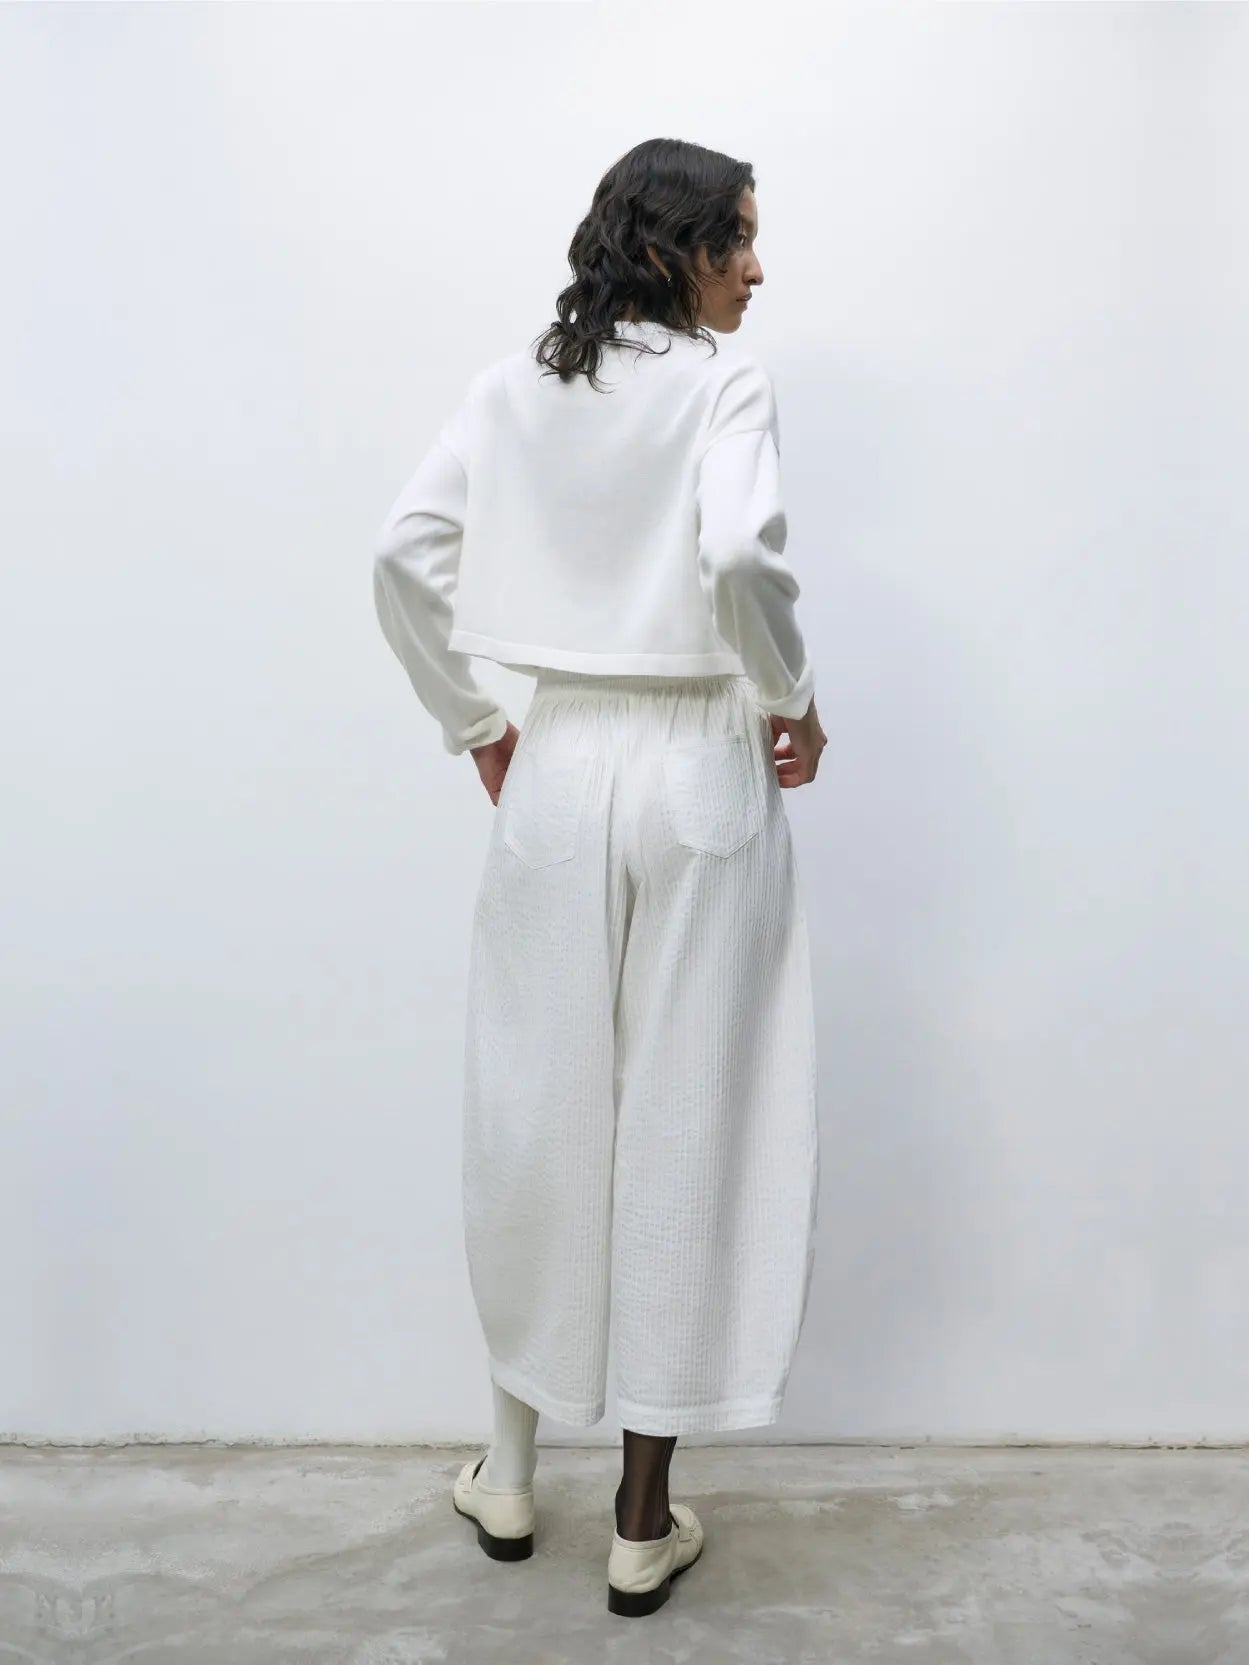 A white, long-sleeved, cropped cardigan with buttons down the front from Cordera. The Cotton Cropped Cardigan White has a simple, minimalist design with a round neckline and ribbed cuffs at the sleeves. The fabric appears soft and lightweight against a plain white background.